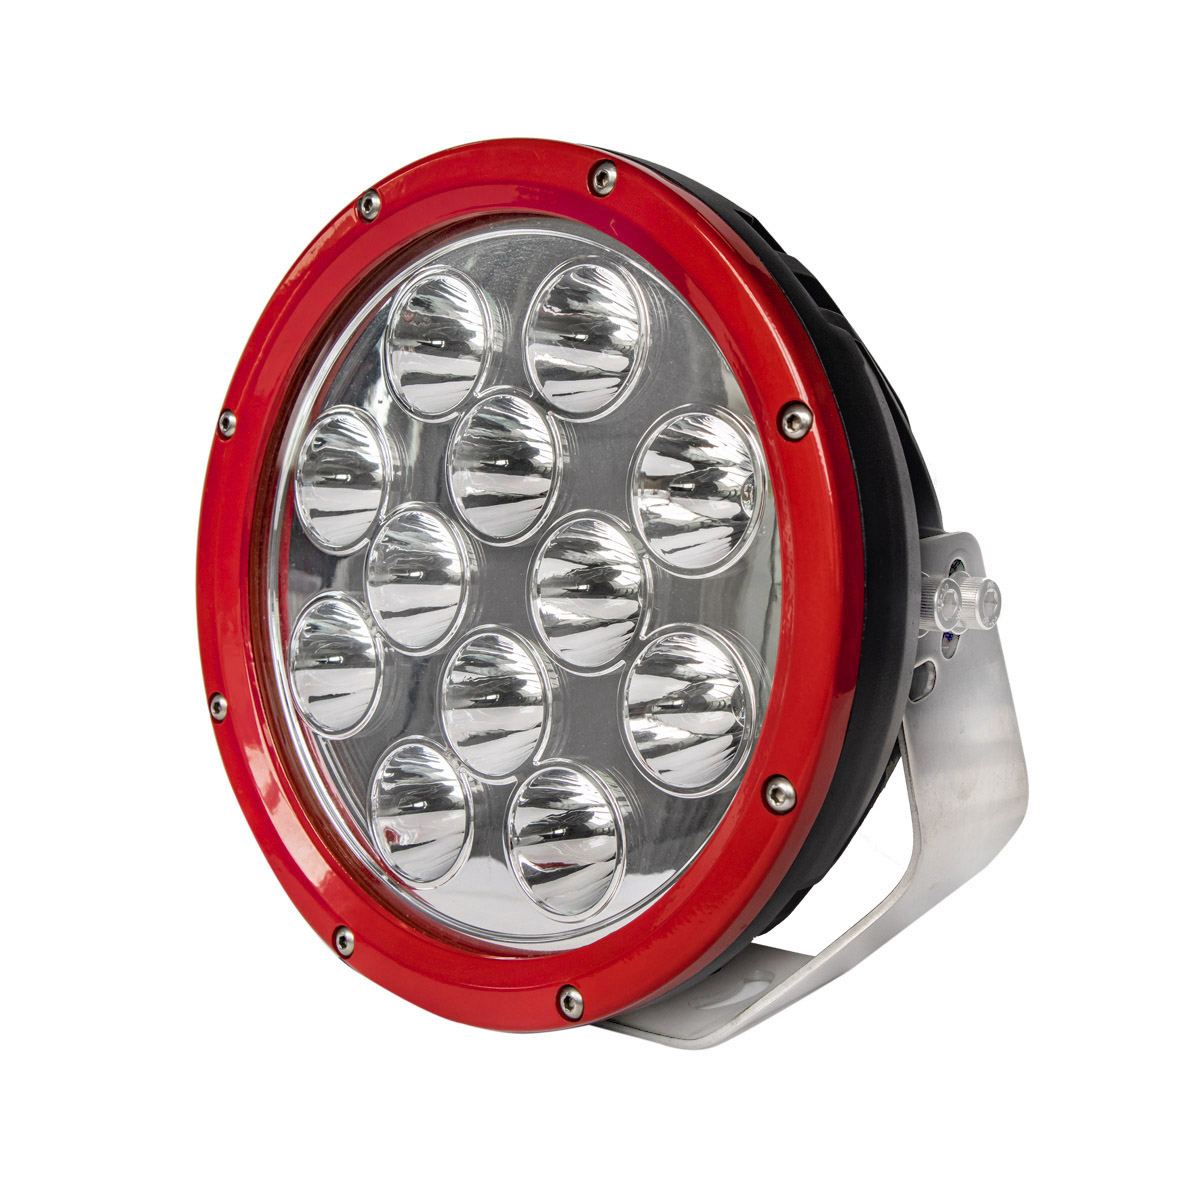 Driving Light - OW-9121 120W